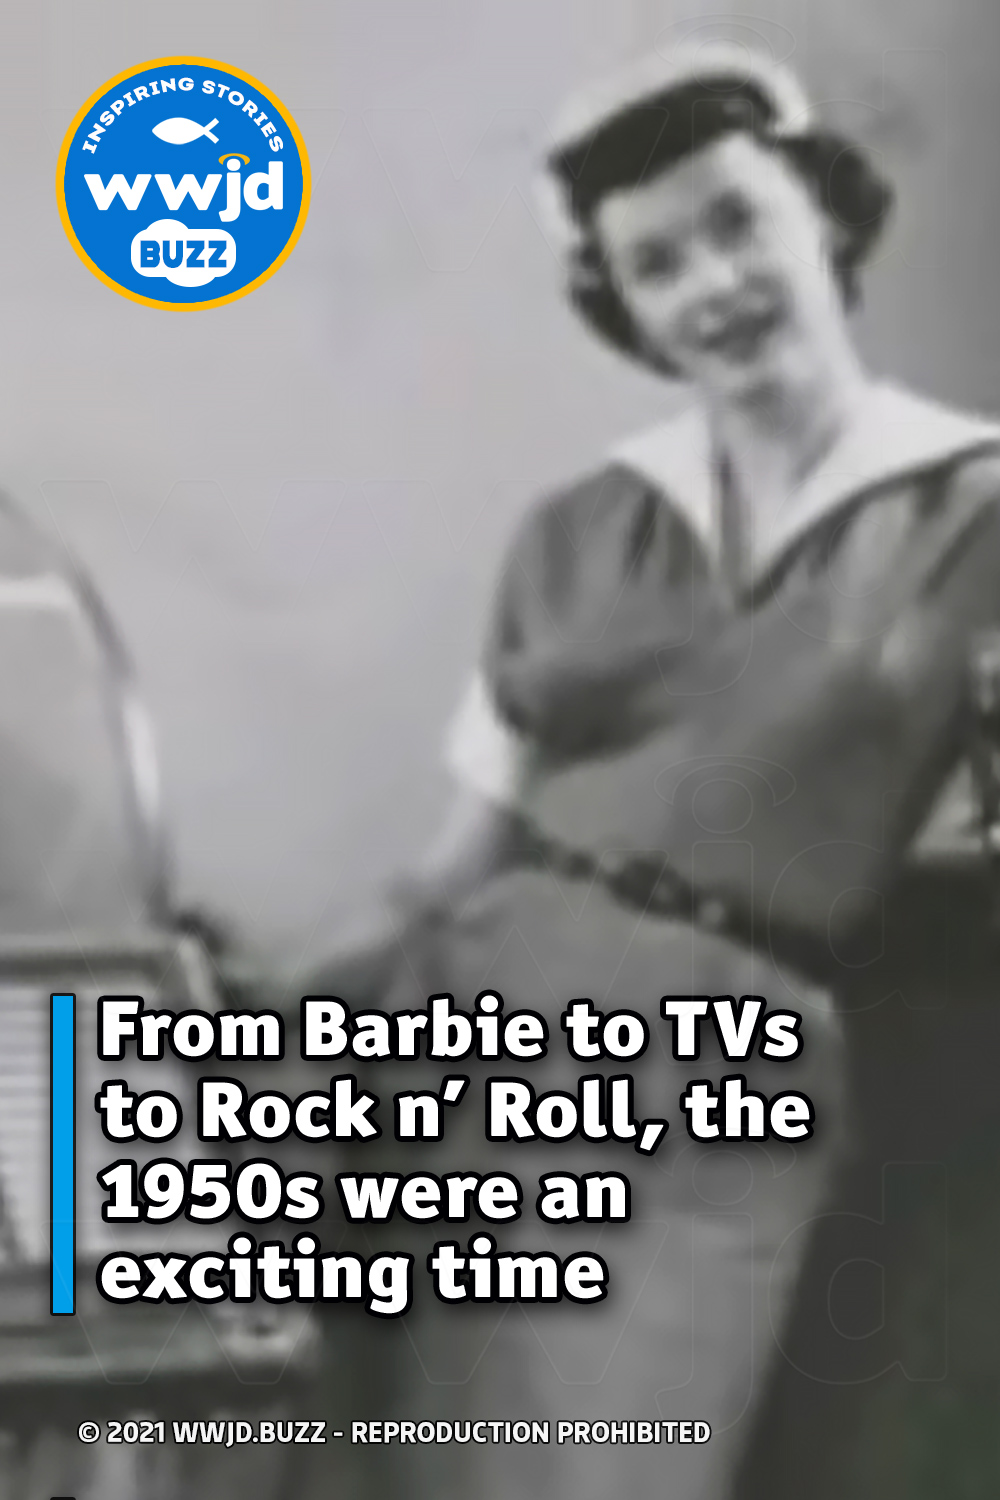 From Barbie to TVs to Rock n’ Roll, the 1950s were an exciting time